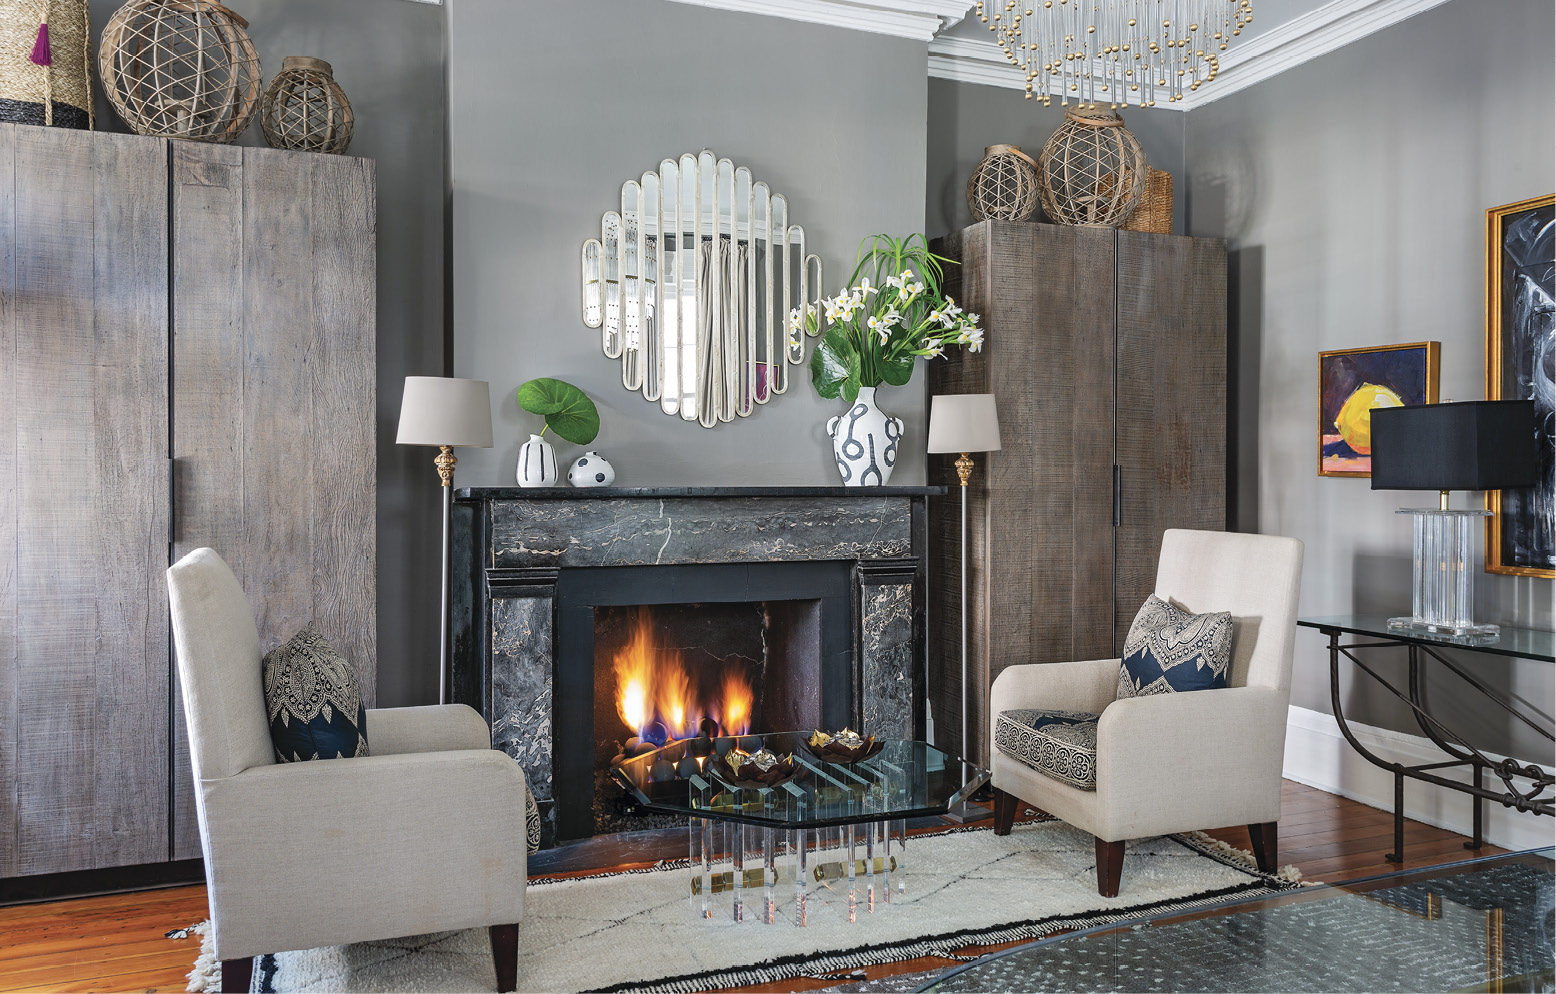 After dinner, the family turns their chairs to enjoy a fireside dessert by the glass and Lucite coffee table (also Patricia Allen Antiques). Restoration Hardware wall cabinets provide ample storage for this multipurpose room.